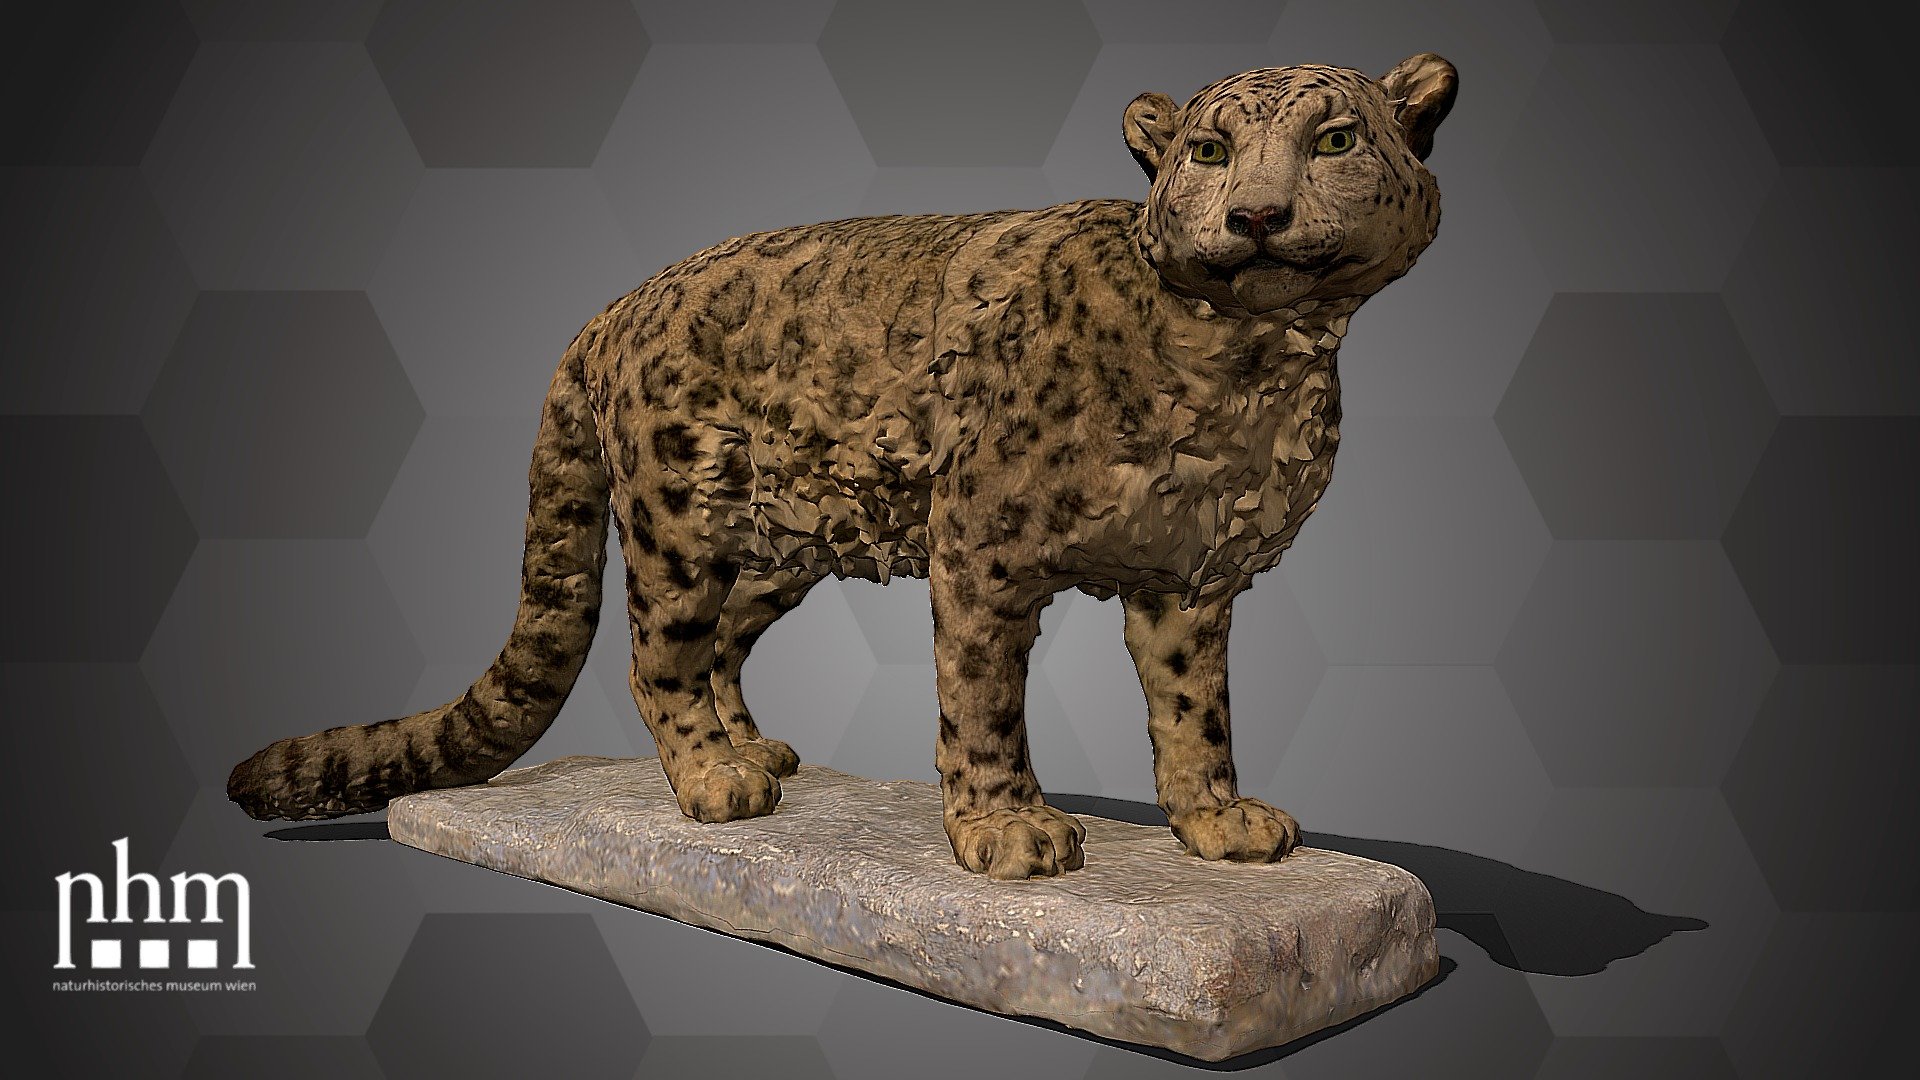 3D scan of a mounted skin of a snow leopard (Uncia uncia), one of the most threatened big cats on earth. Thanks to successful breeding programs, they can frequently be seen in zoos, but they are rarer in museums. This female snow leopard died in the Schönbrunn Zoo in Vienna in 1943 and  was mounted at the NHM Vienna. 

The snow leopard is Number 95 of the NHM Top 100 and can be found in Hall 38 of the NHM Vienna. 

Specimen: Uncia uncia (Schreber, 1775)

Inventory number: NHMW-Zoo-MAMM B5555

Collection: Natural History Museum Vienna, 1st Zoological Dept., Mammal Coll. (curator: Frank E. Zachos)

Find out more about the NHMW here.

Scanned and edited by Alba Zuna-Kratky, Anna Haider &amp; Viola Winkler (NHMW)

Scanner: Artec Leo. Infrastructure funded by the FFG 3d model